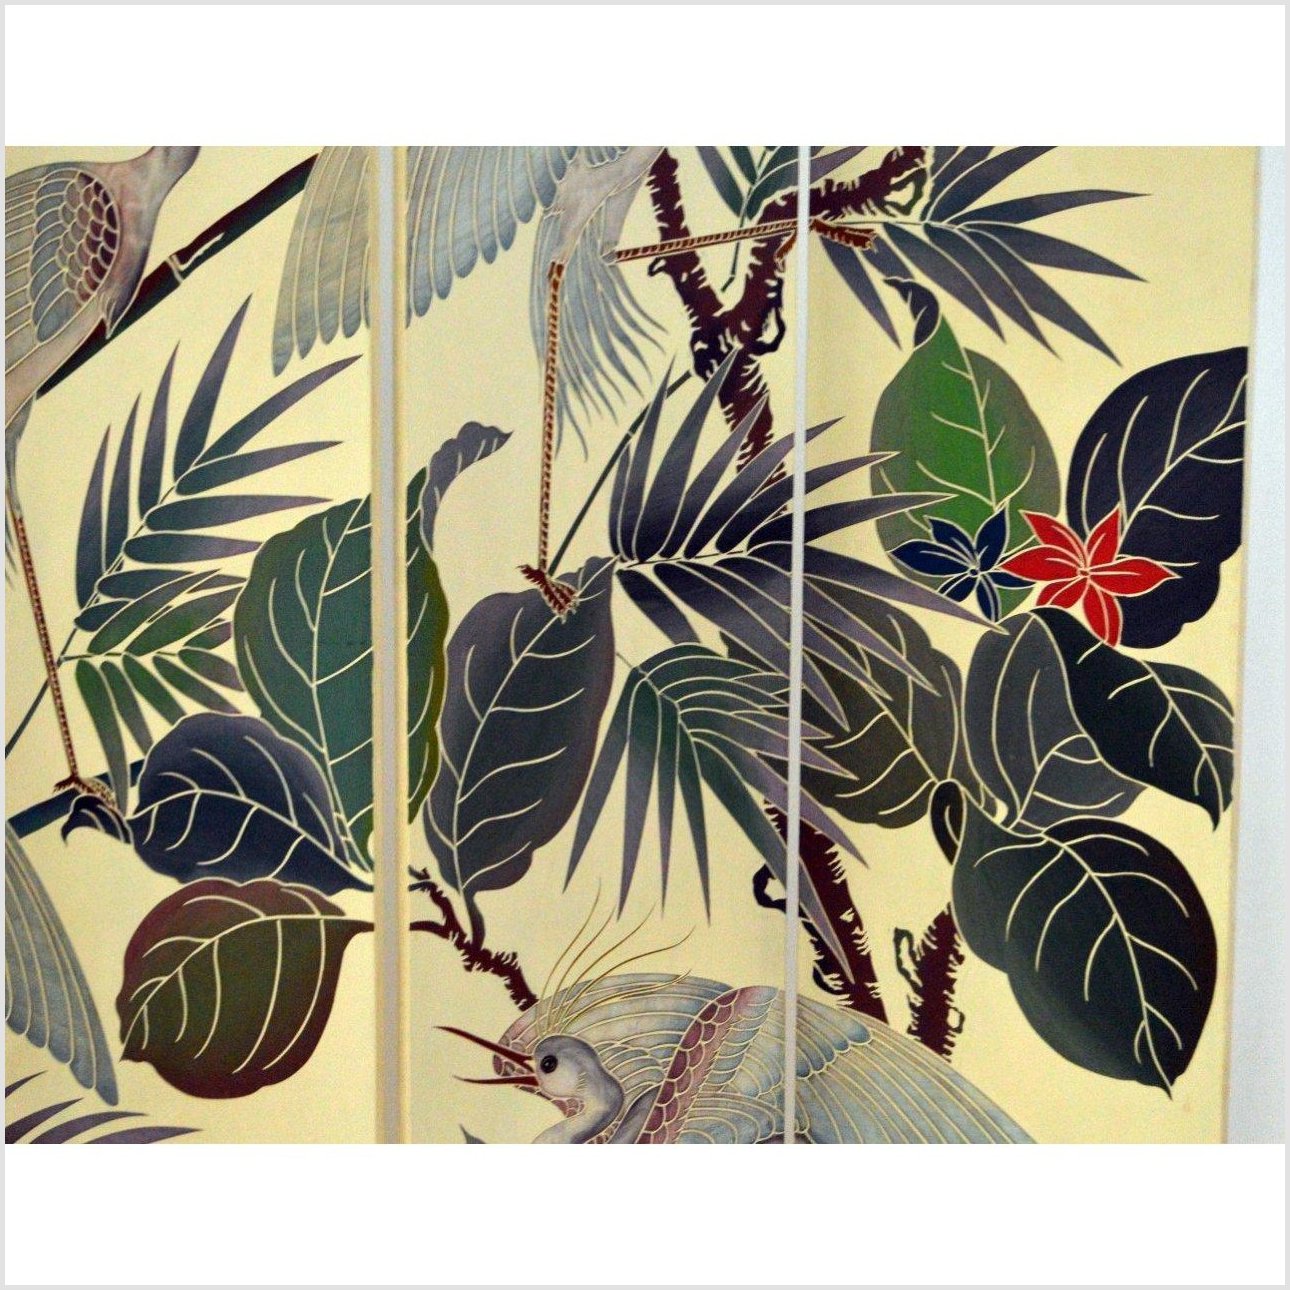 4-Panel Screen Designed with Cranes and Tropical Plants-YN2850-12. Asian & Chinese Furniture, Art, Antiques, Vintage Home Décor for sale at FEA Home